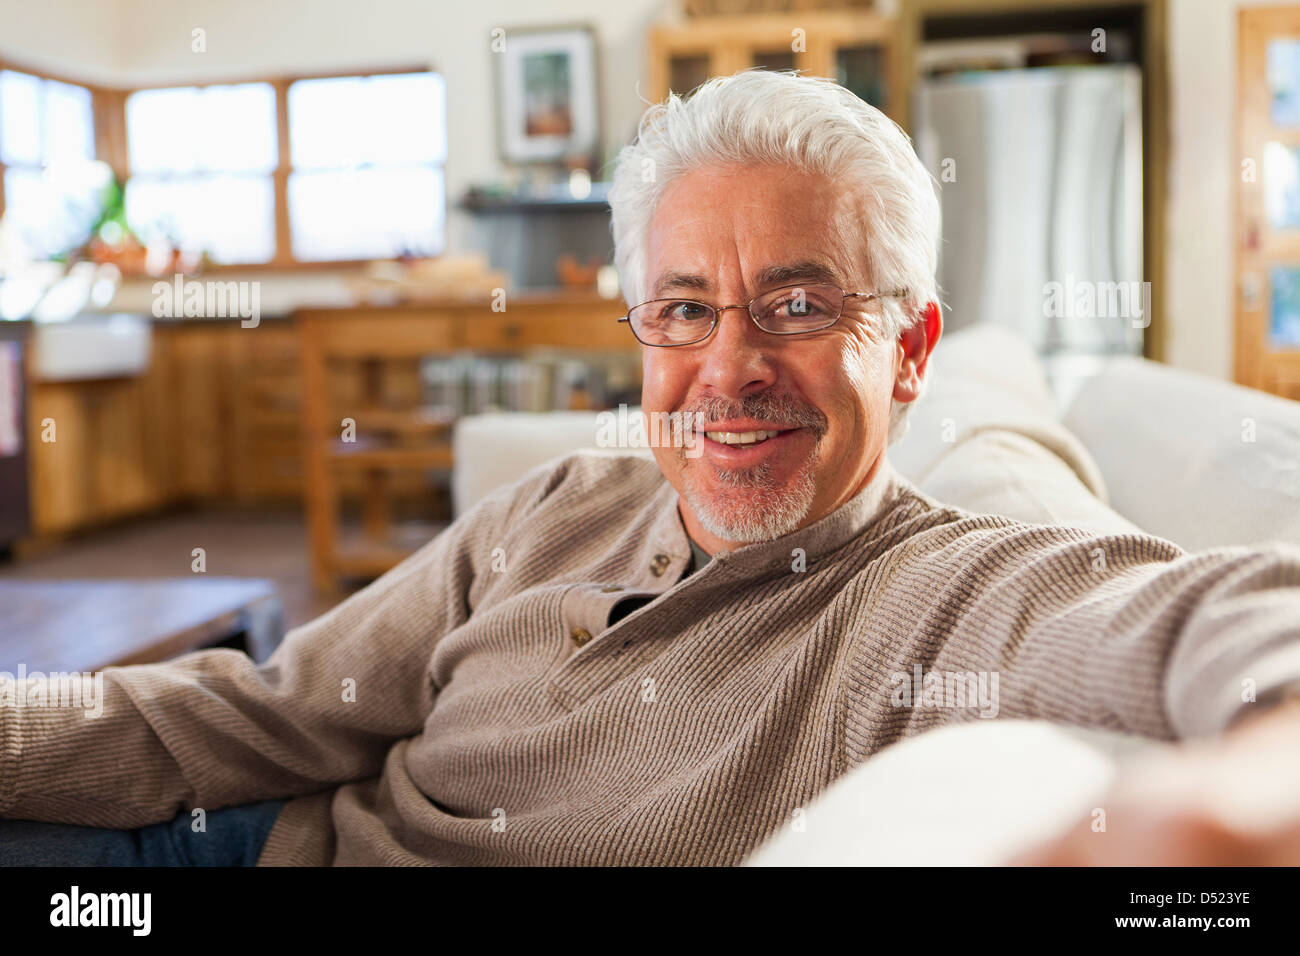 Hispanic man sitting on sofa in living room Banque D'Images